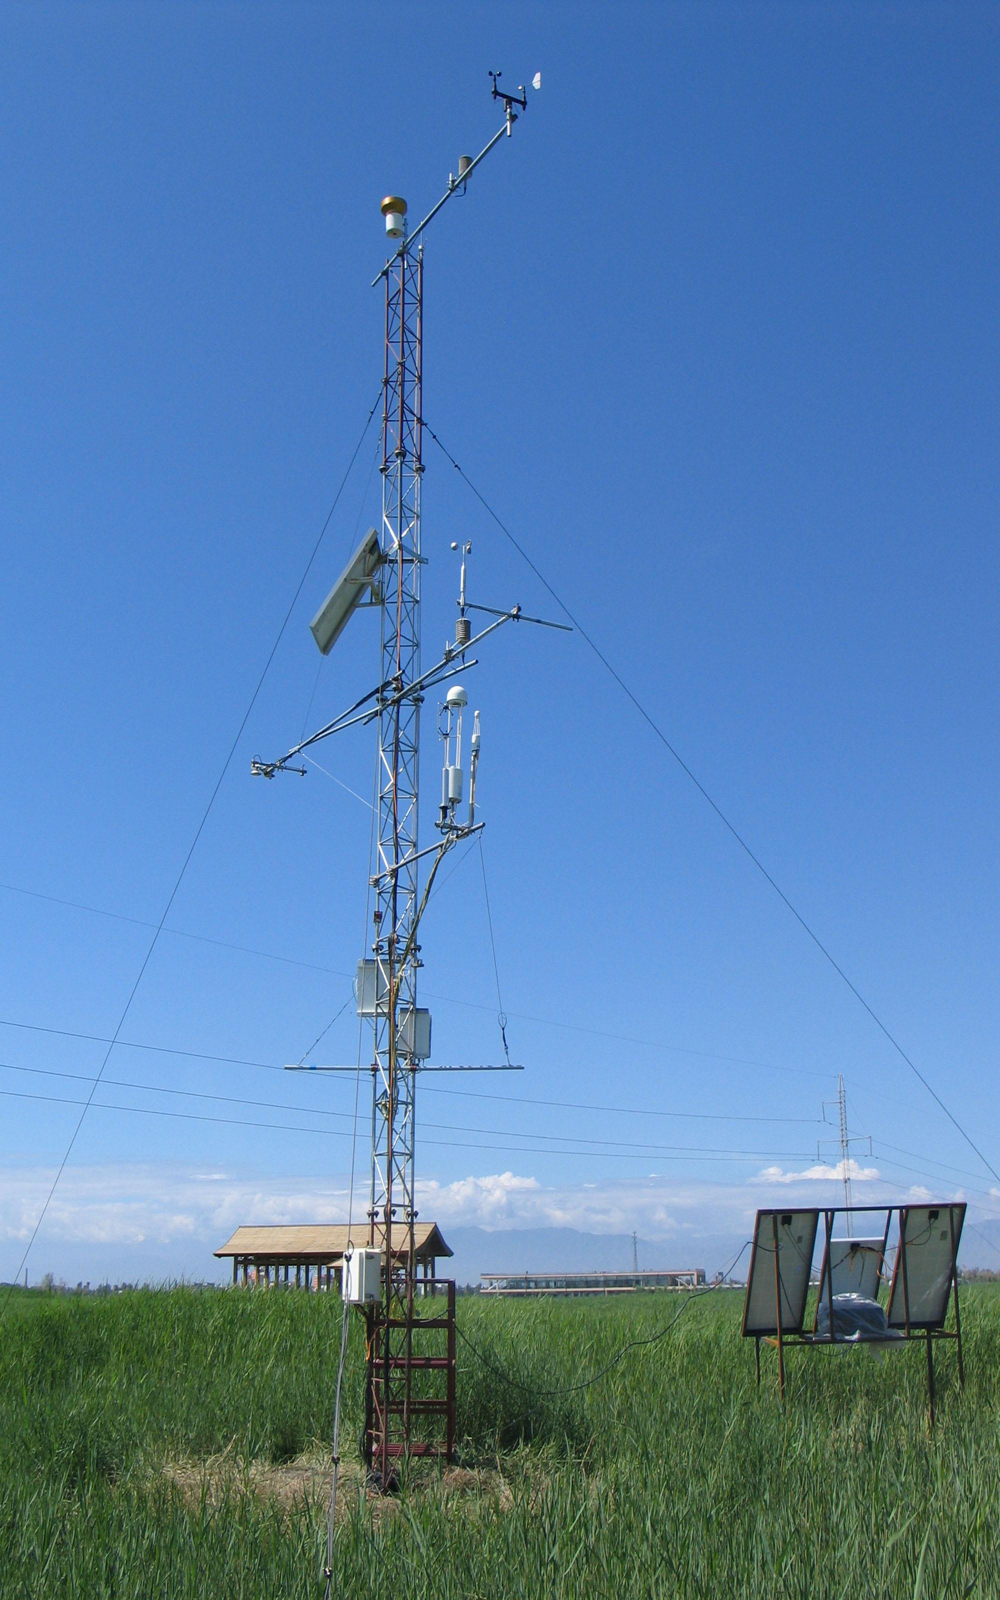 Qilian Mountains integrated observatory network: Dataset of Heihe integrated observatory network (automatic weather station of Zhangye wetland station, 2019)